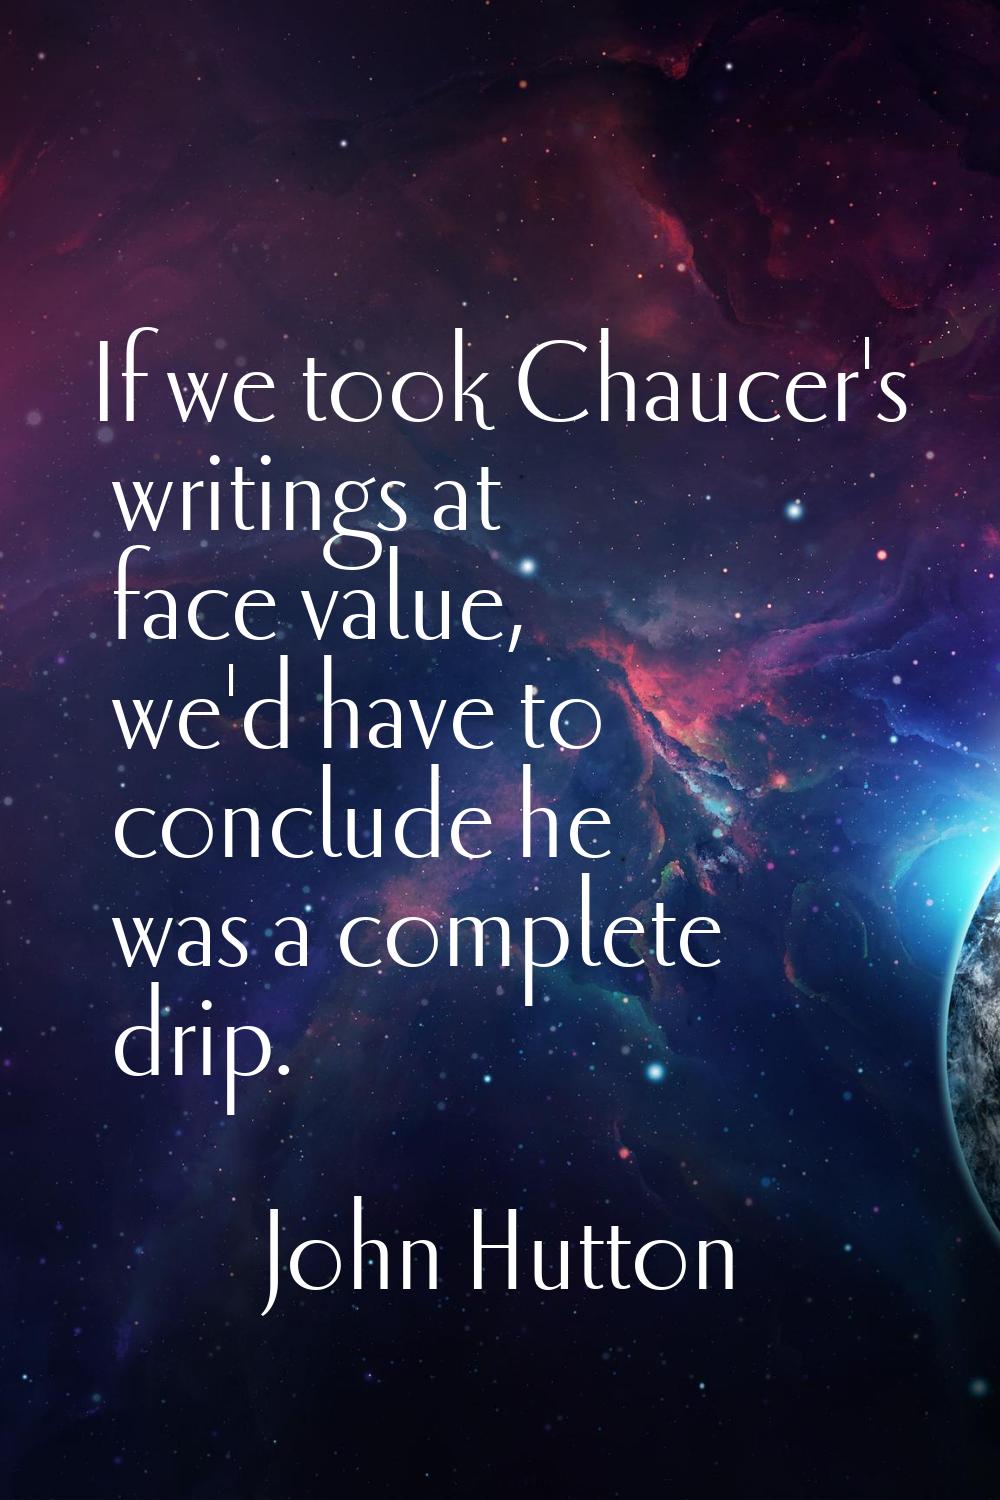 If we took Chaucer's writings at face value, we'd have to conclude he was a complete drip.